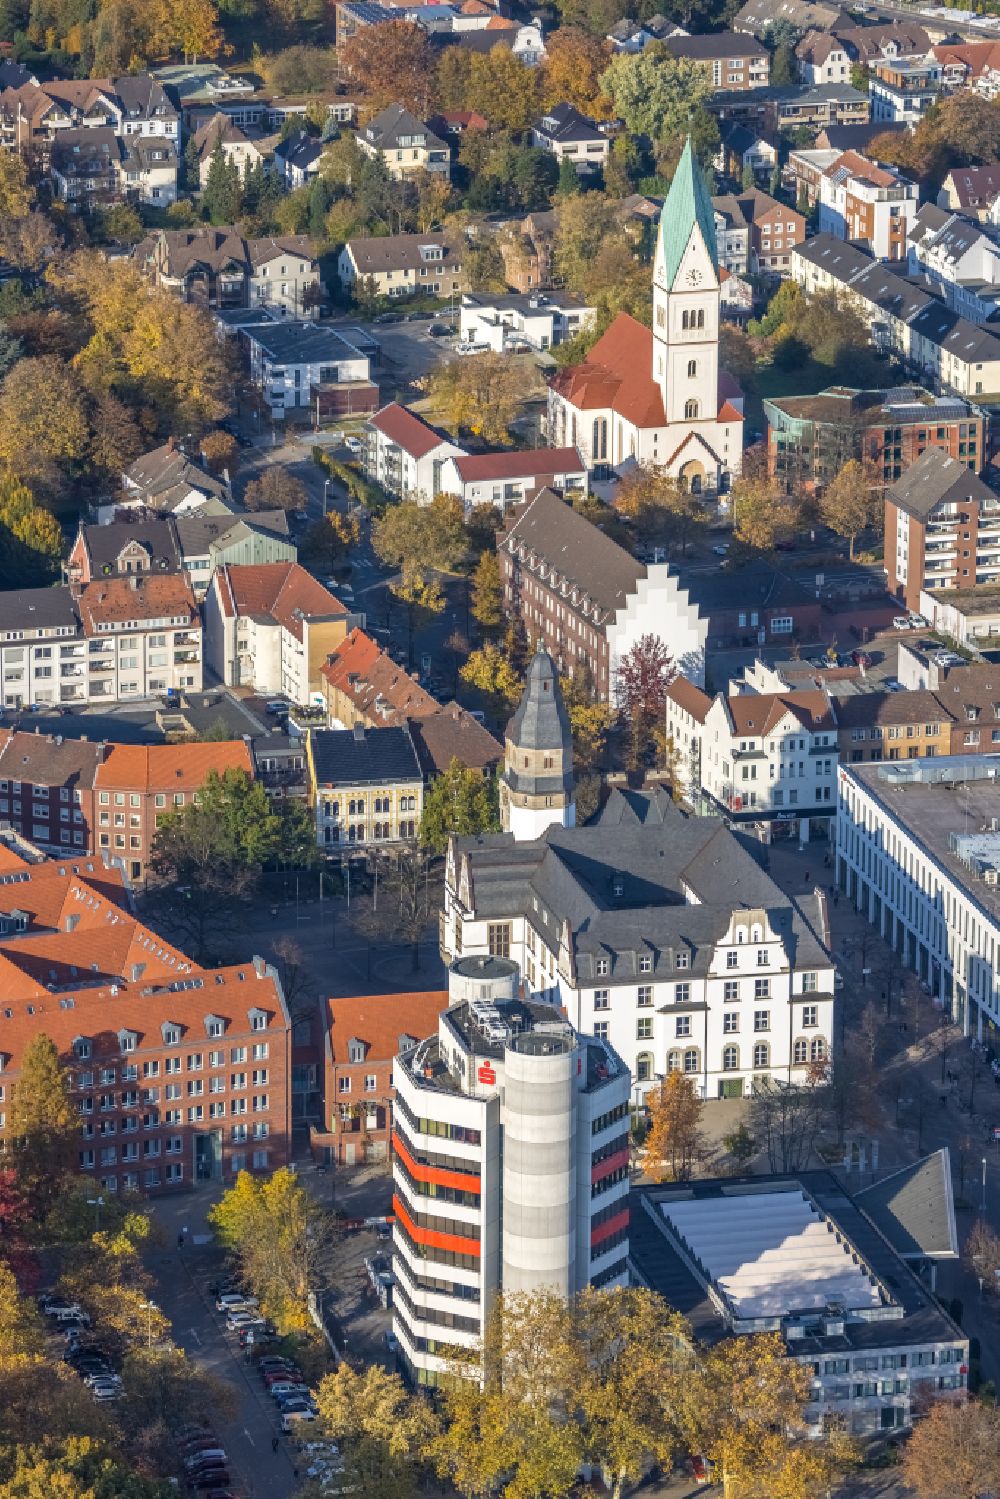 Aerial photograph Gladbeck - banking administration building of the financial services company Stadtsparkasse Gladbeck - Hauptgeschaeftsstelle on Friedrich-Ebert-Strasse in the district Gelsenkirchen-Nord in Gladbeck at Ruhrgebiet in the state North Rhine-Westphalia, Germany